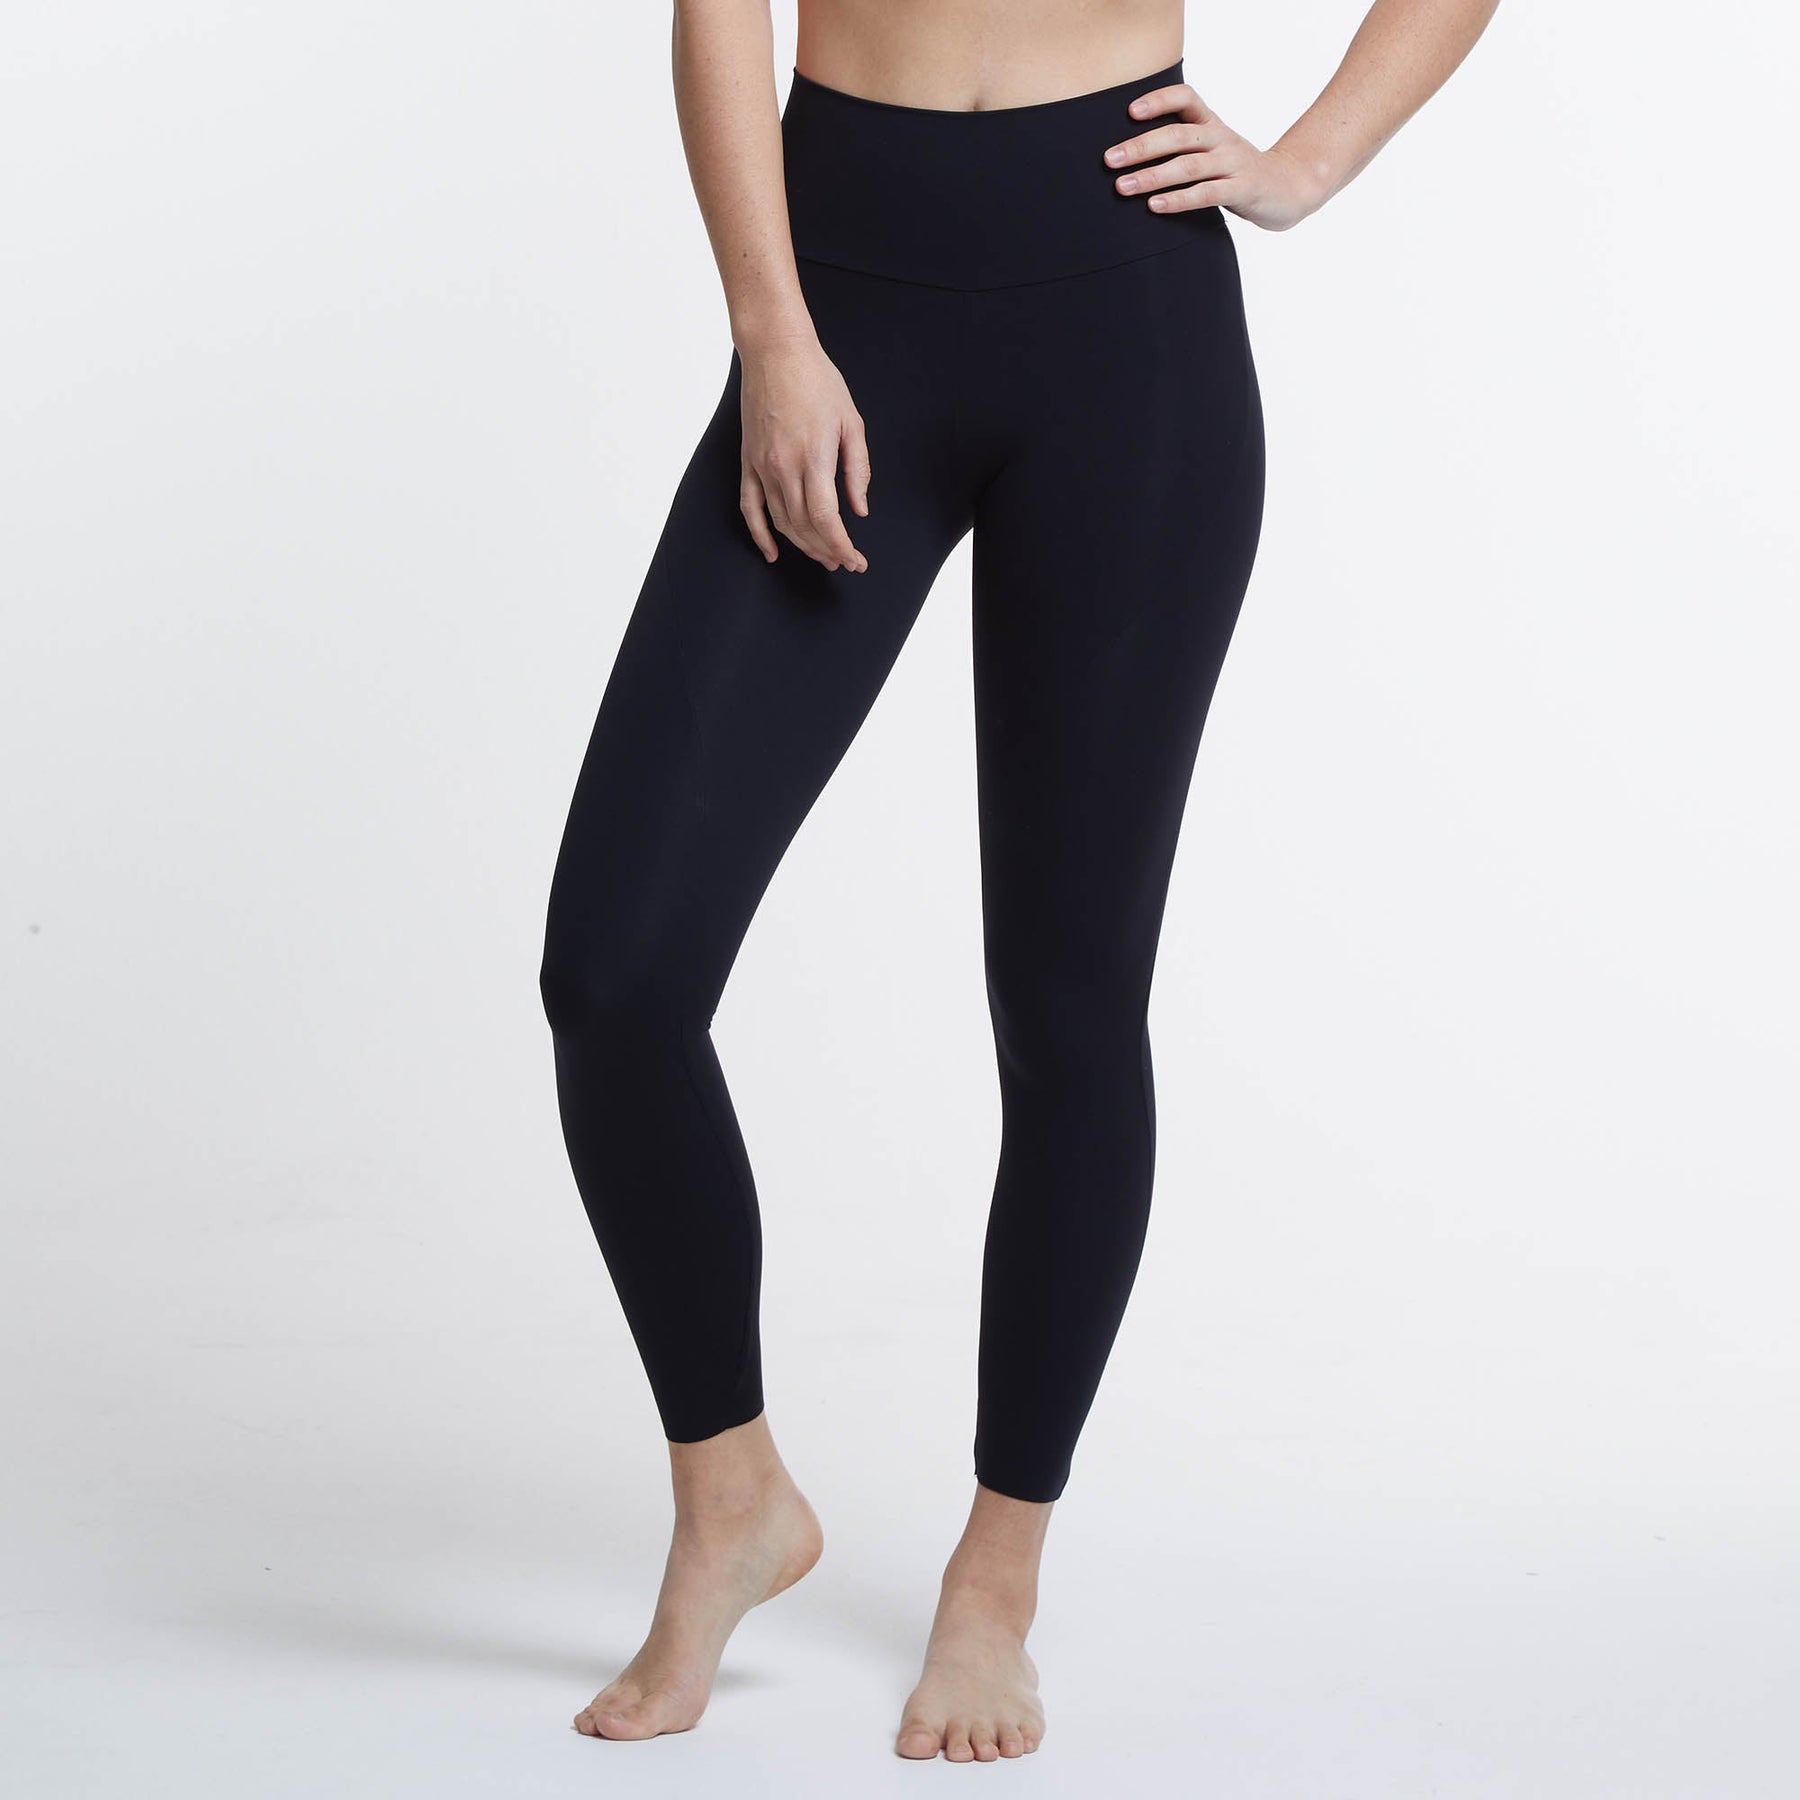 Black LEGGINGS | Stylish Black Slimming Effect Sexy Pants with Zippers